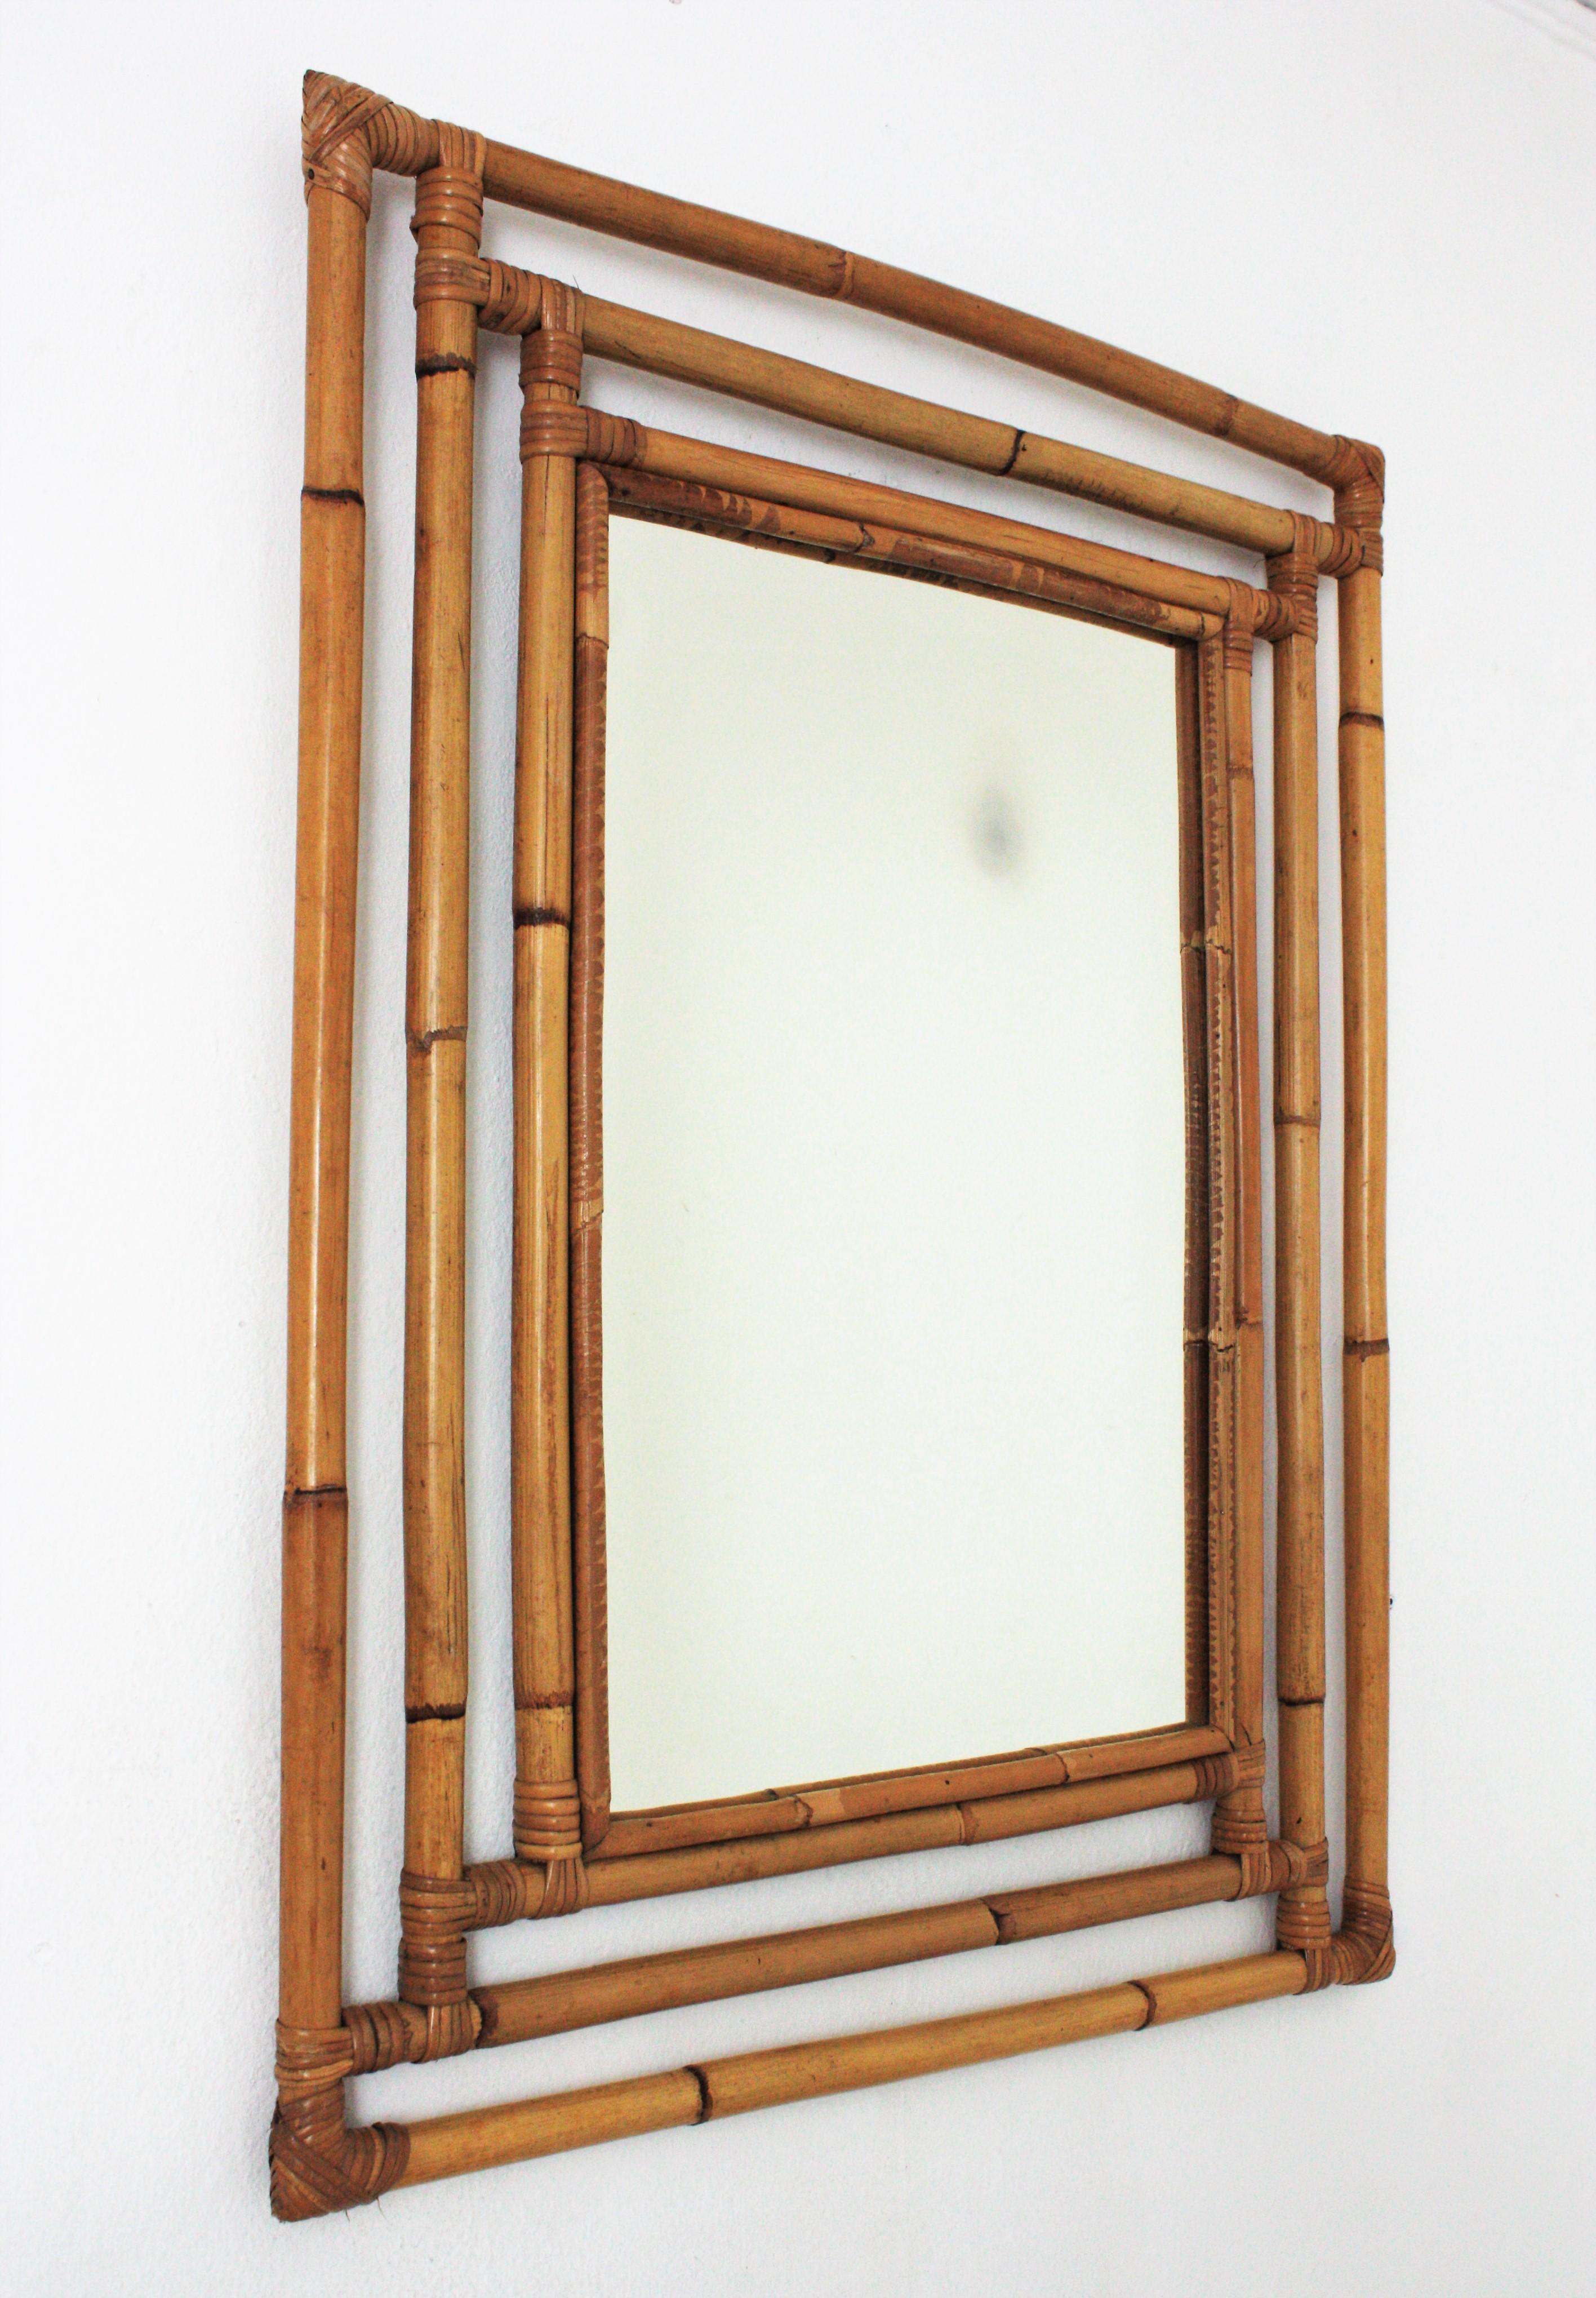 Gorgeous Tiki style rectangular mirror handcrafted with bamboo cane. Spain, 1960s.
Highly decorative handcrafted bamboo frame with geometric shapes, oriental accents and a large glass surface,
This mirror is in excellent vintage